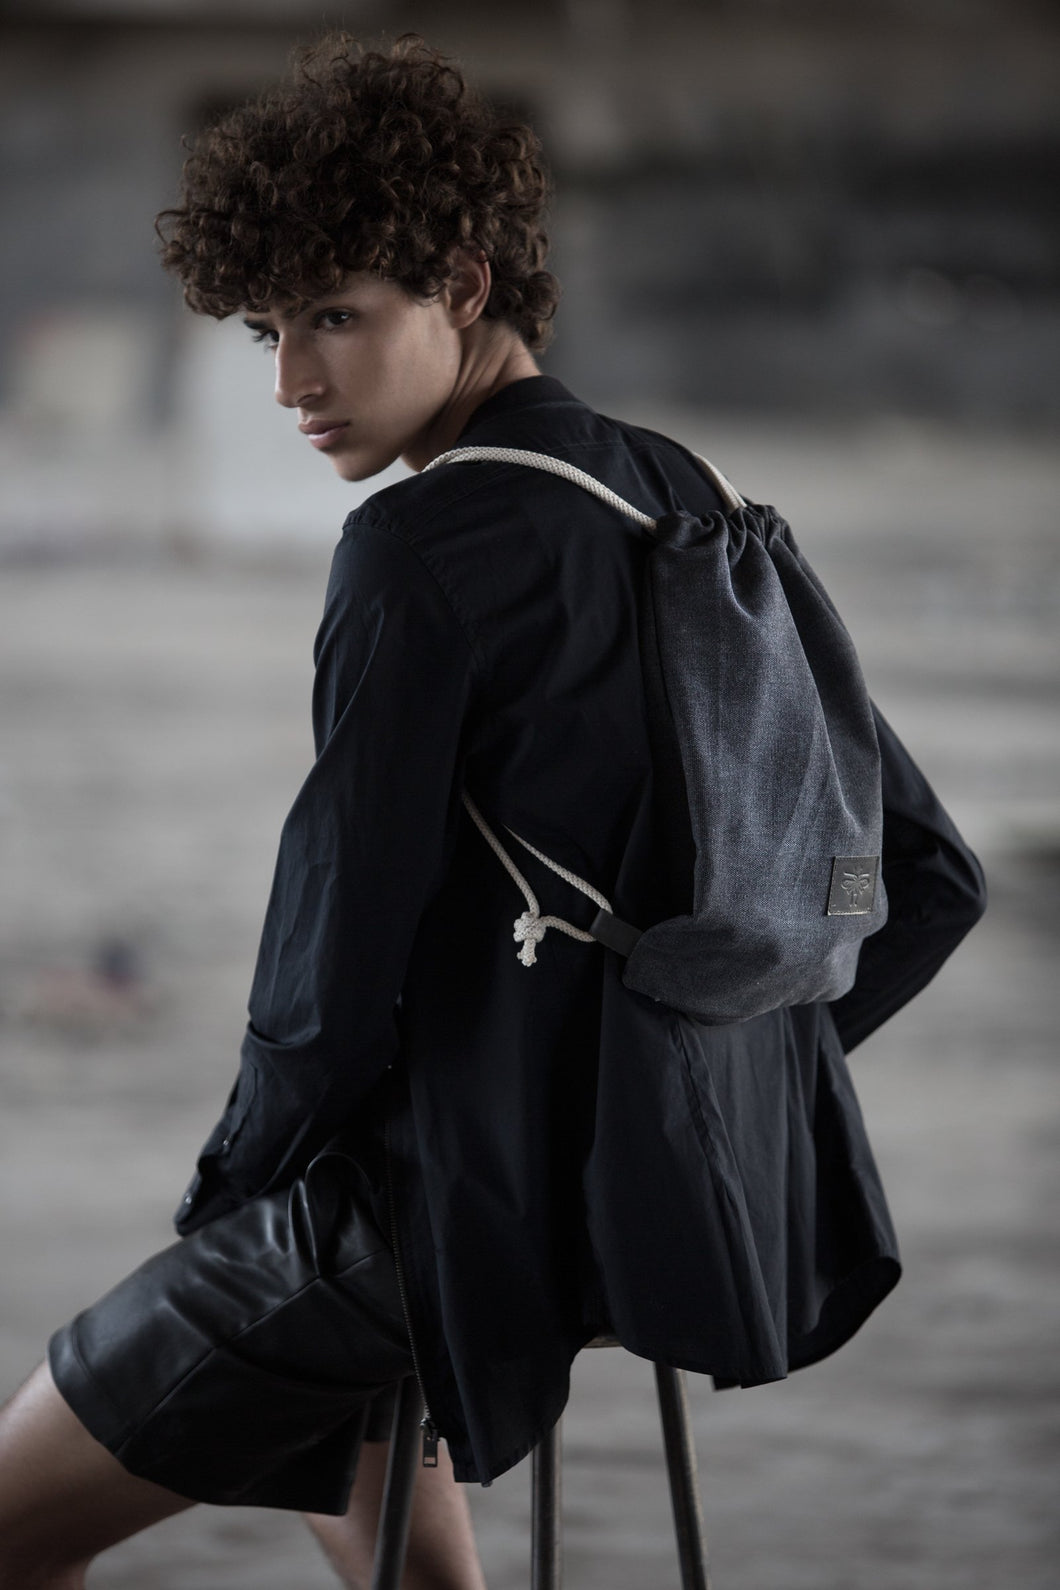 Backpack - Black Canvas & Leather